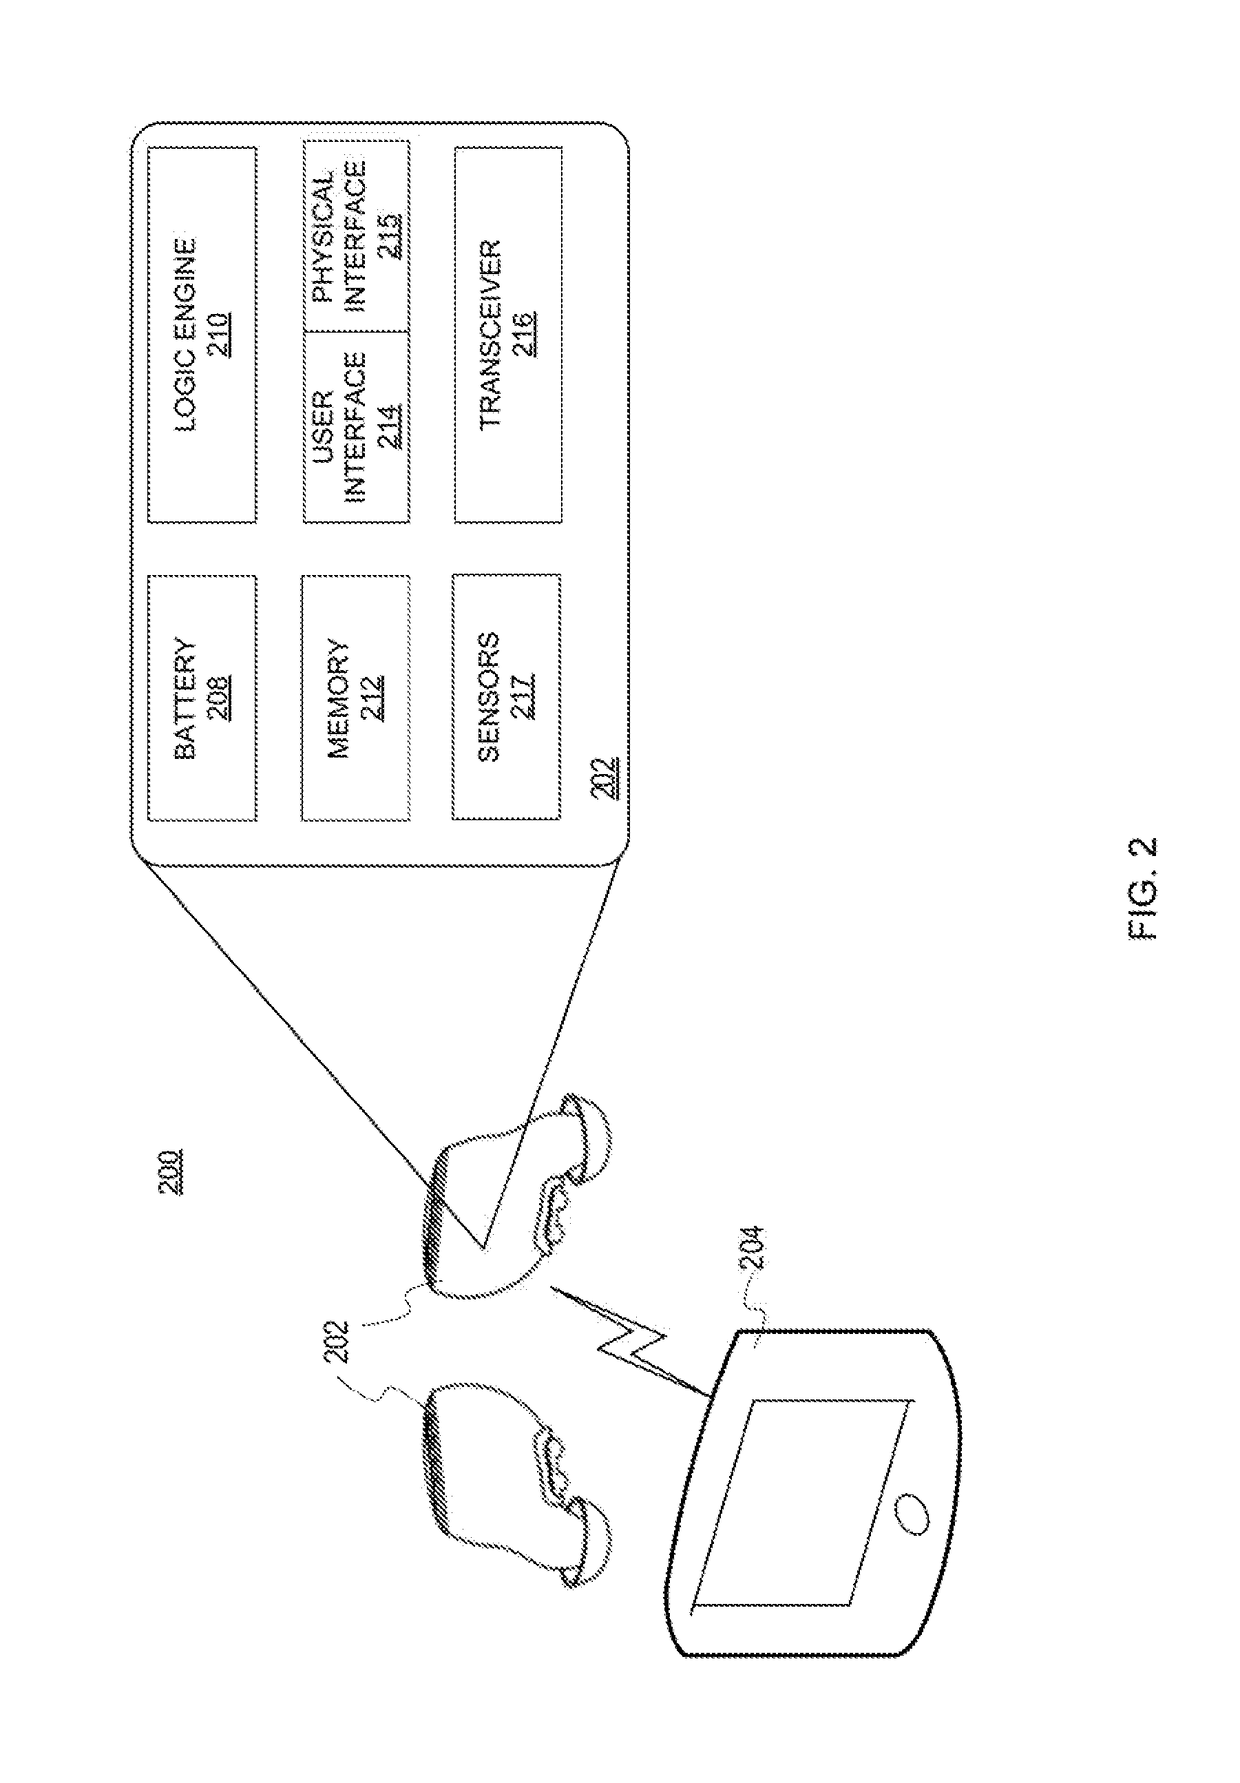 Enhanced Biometric Control Systems for Detection of Emergency Events System and Method